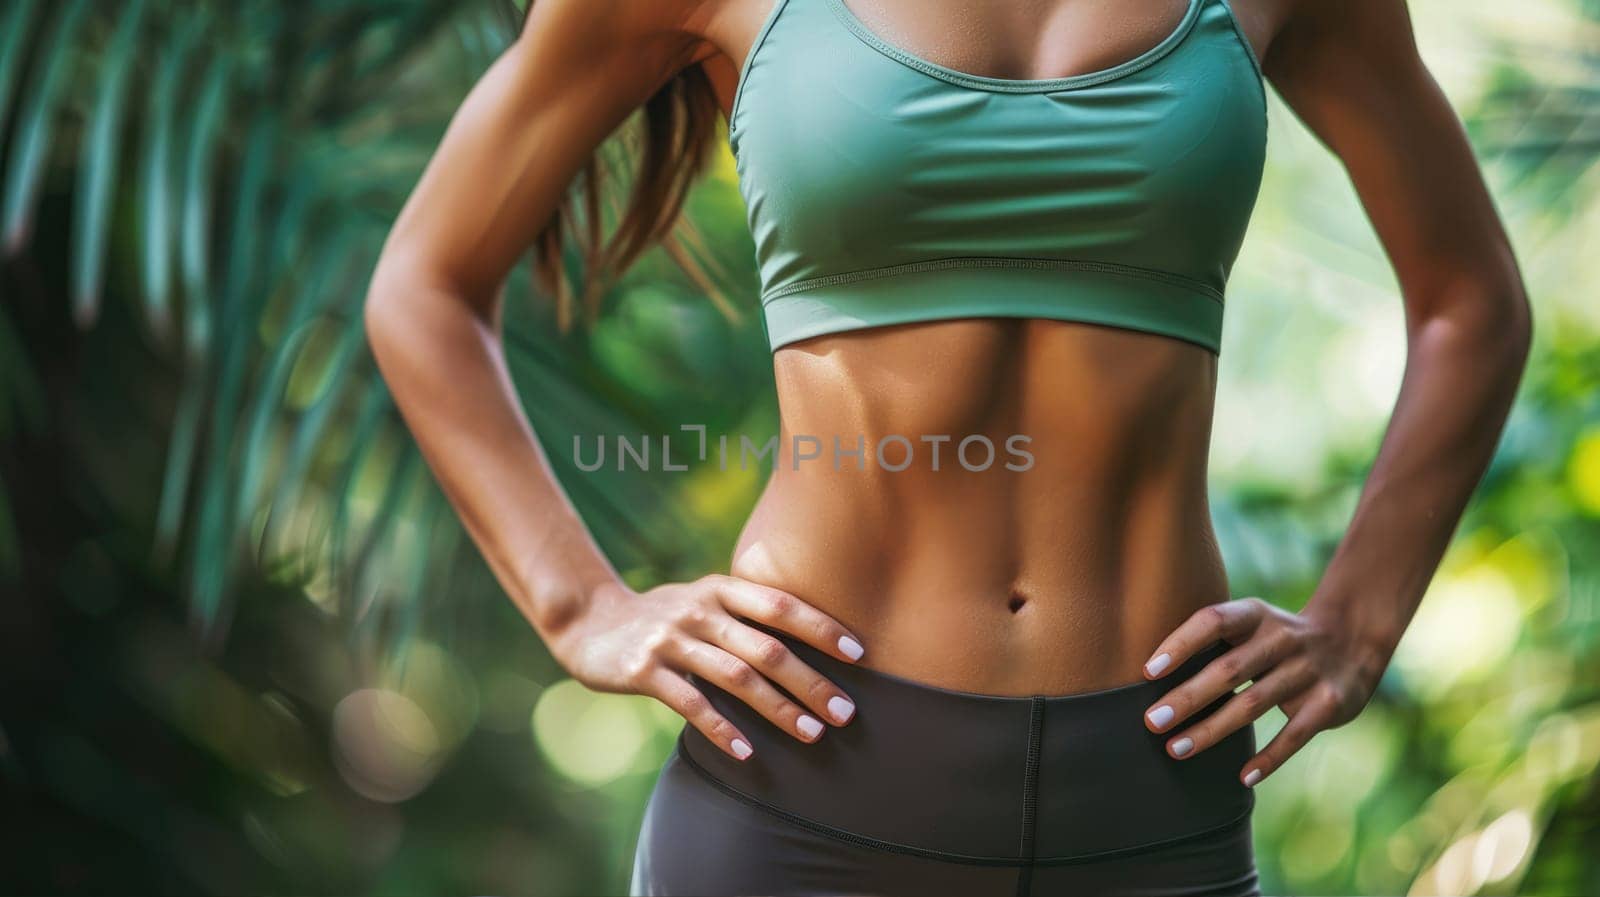 Abdominal muscles of fit fitness woman in green top by natali_brill